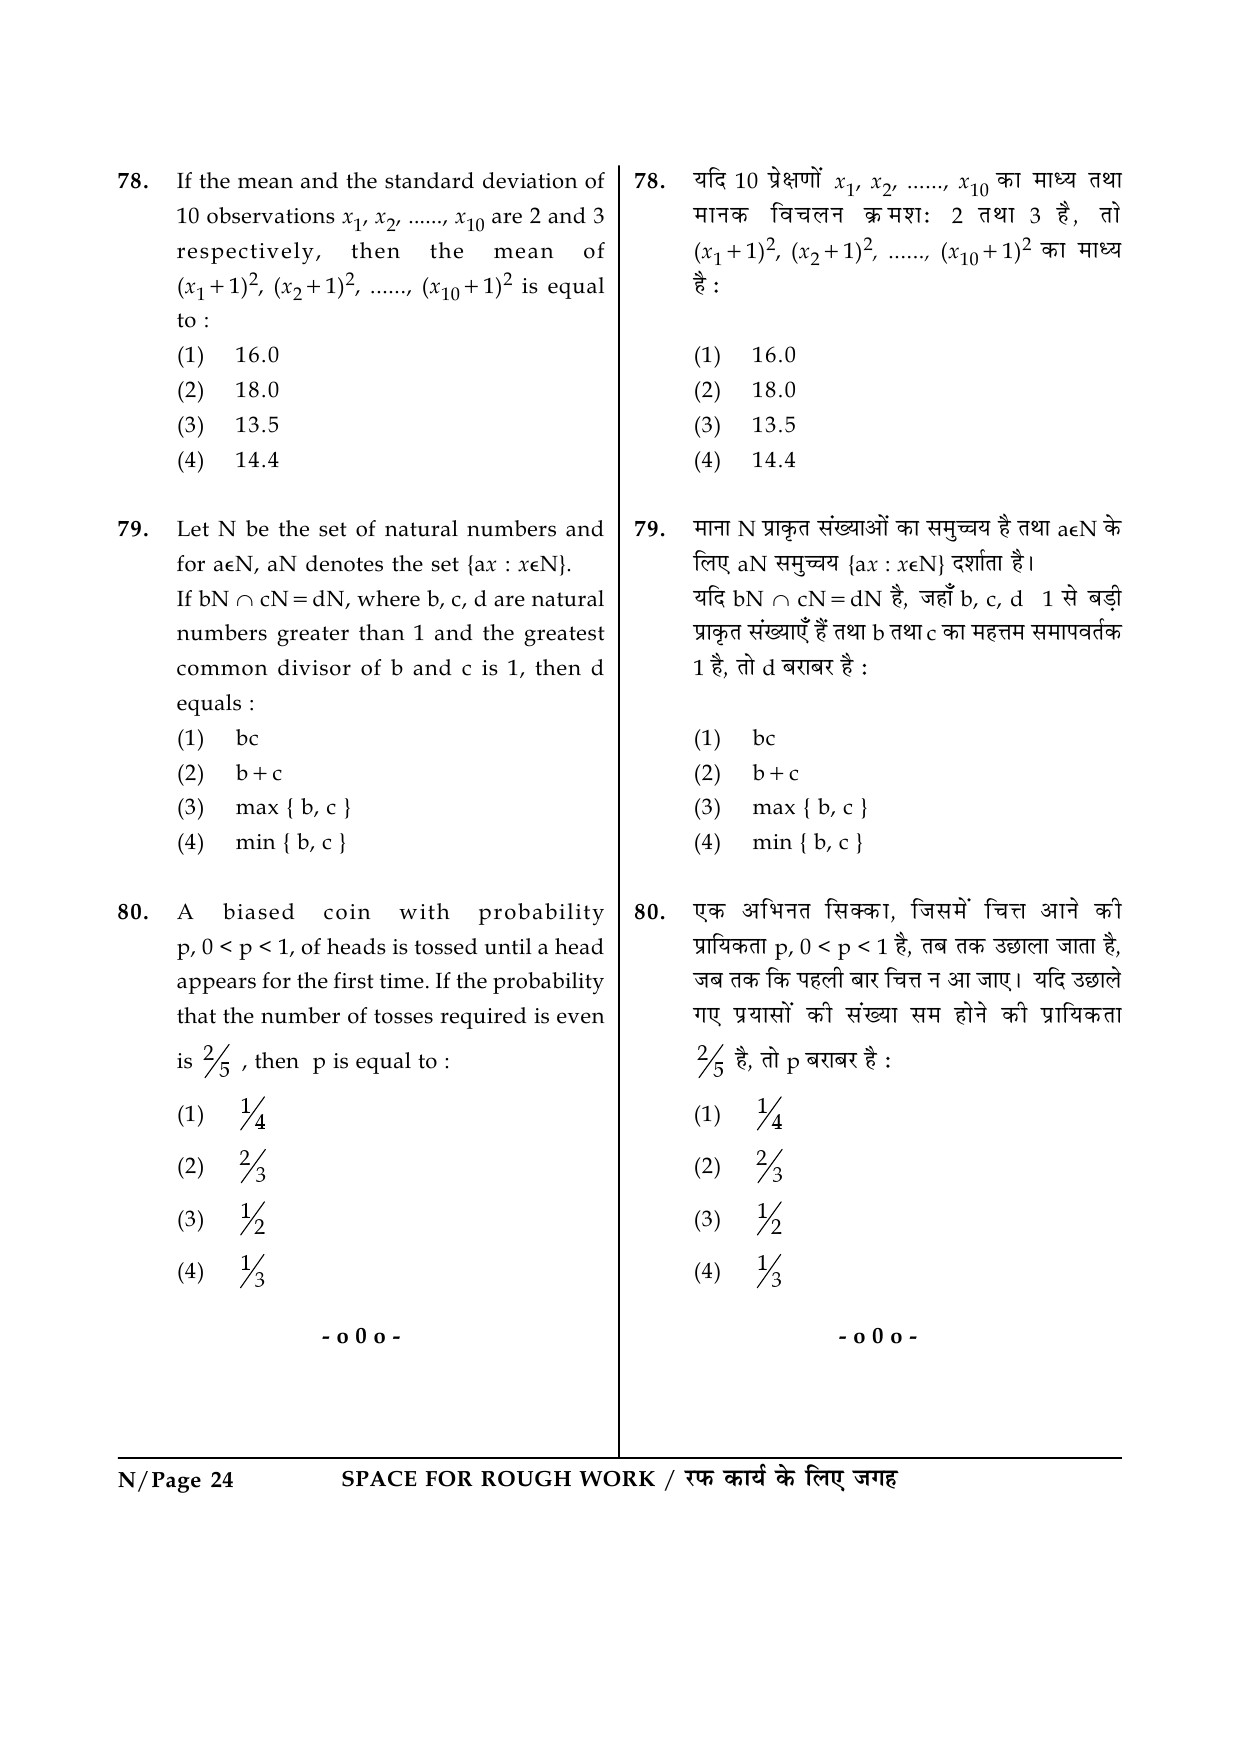 JEE Main Exam Question Paper 2015 Booklet N 24